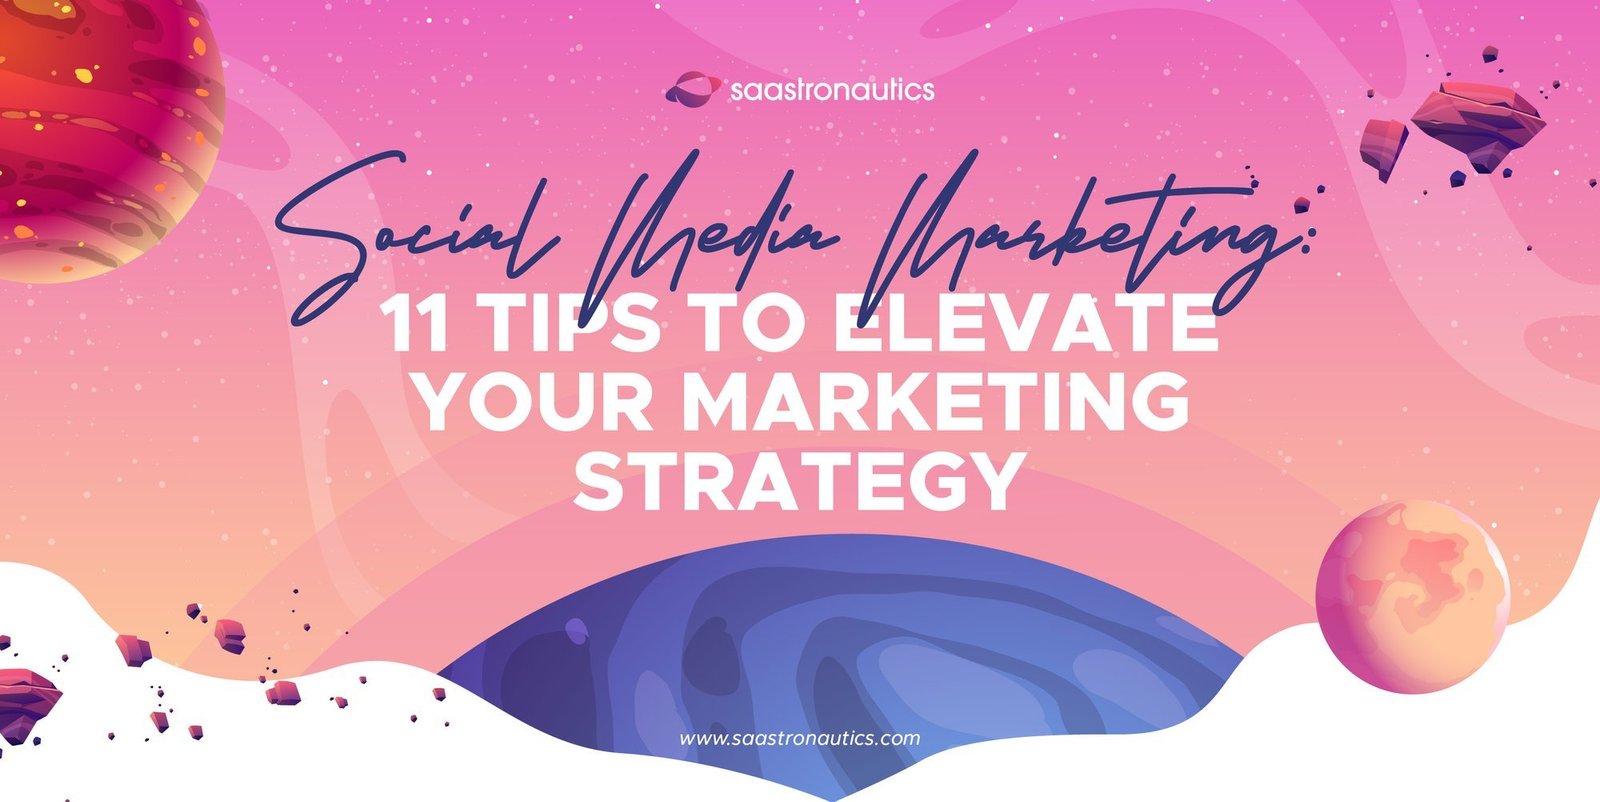 Social Media Marketing: 11 Tips to Elevate Your Marketing Strategy